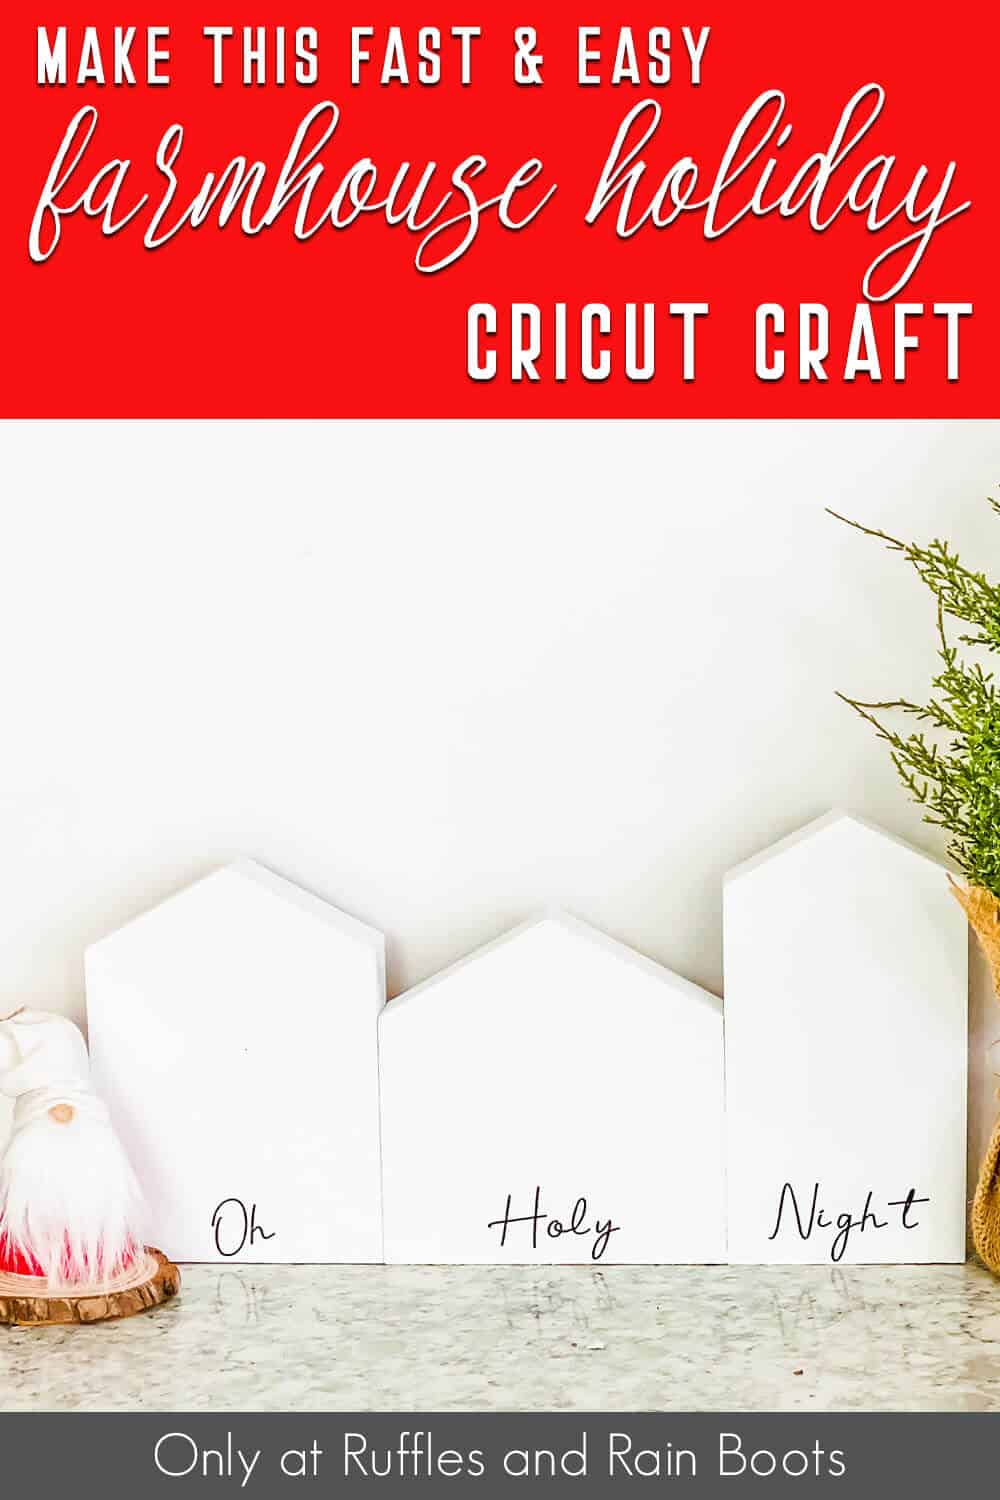 holiday wood house cricut craft with text which reads make this easy and fun farmhouse holiday cricut craft